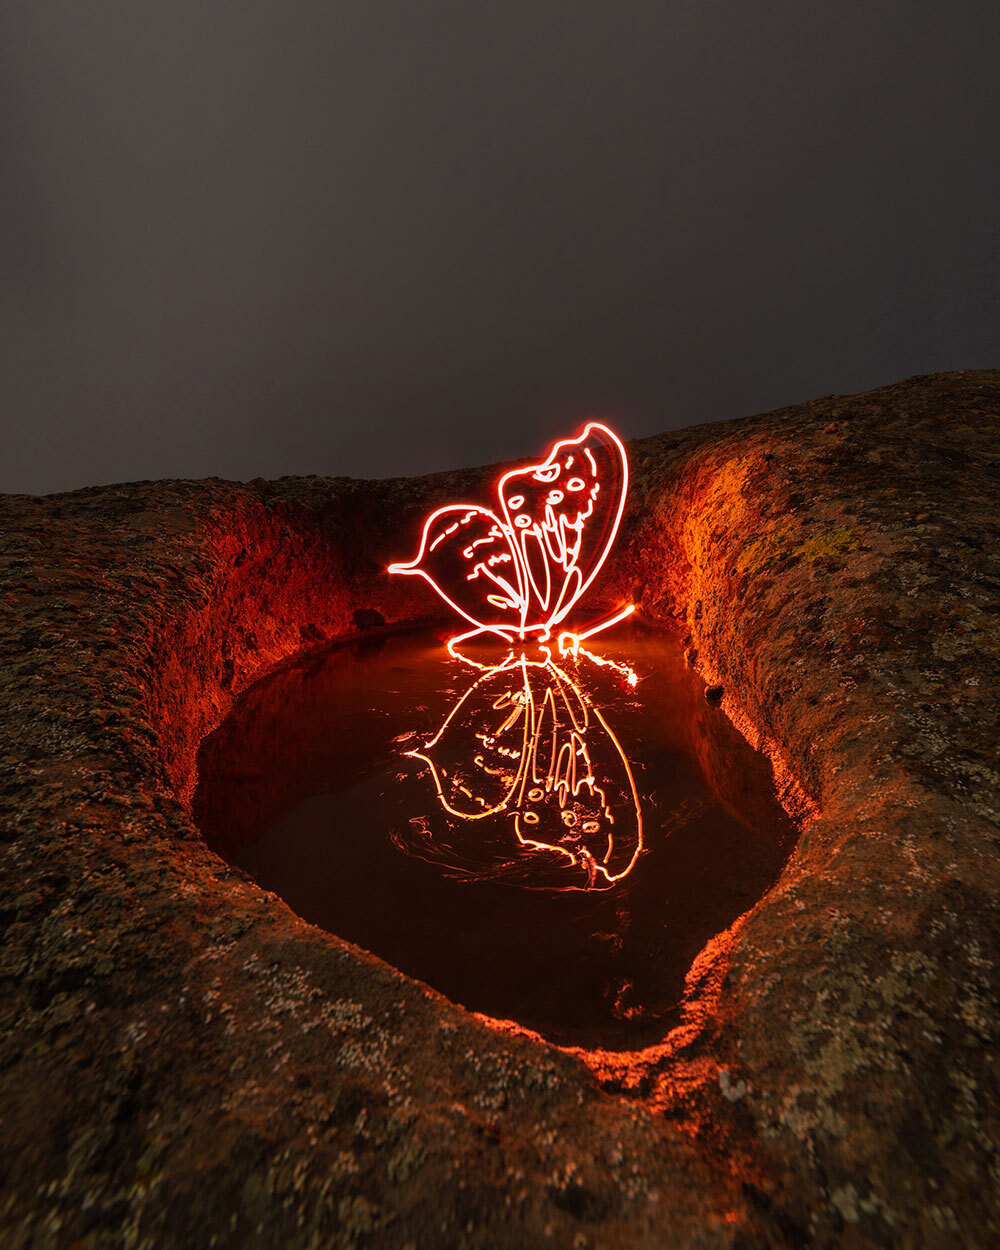 A glowing light drawing of a butterfly